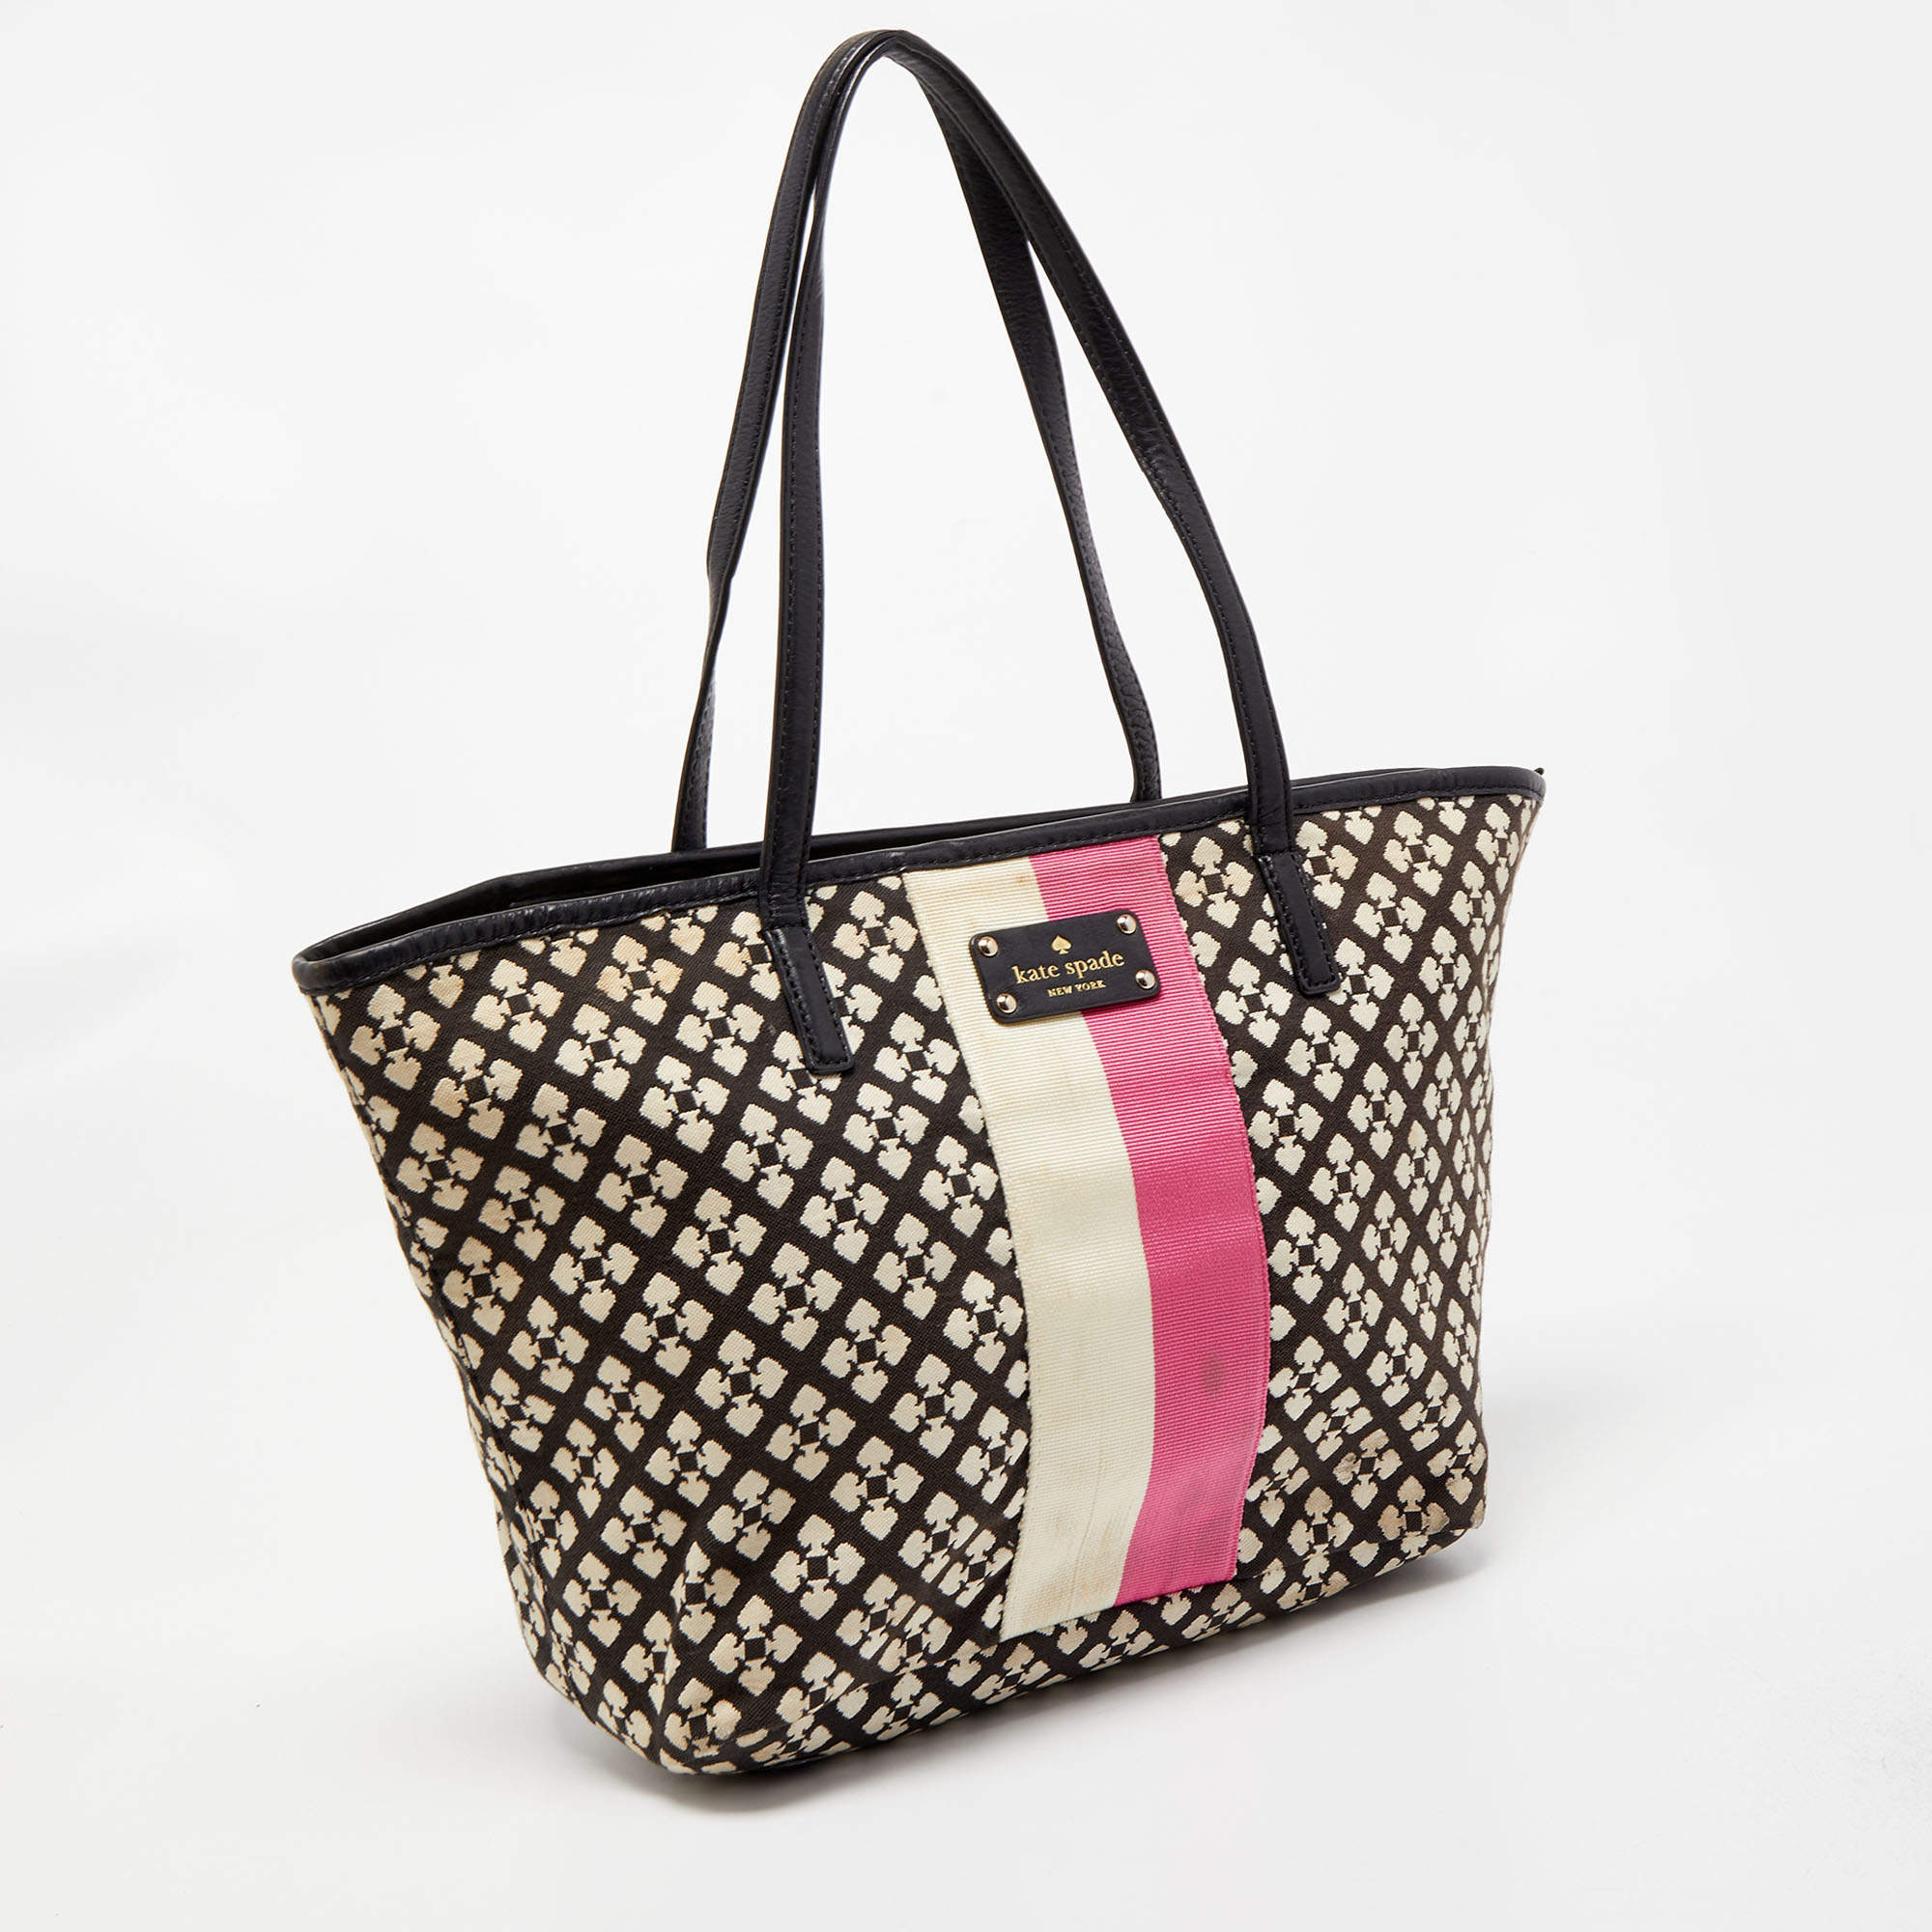 Kate Spade Hawthorne Lane Striped Coated Canvas Tote in Black